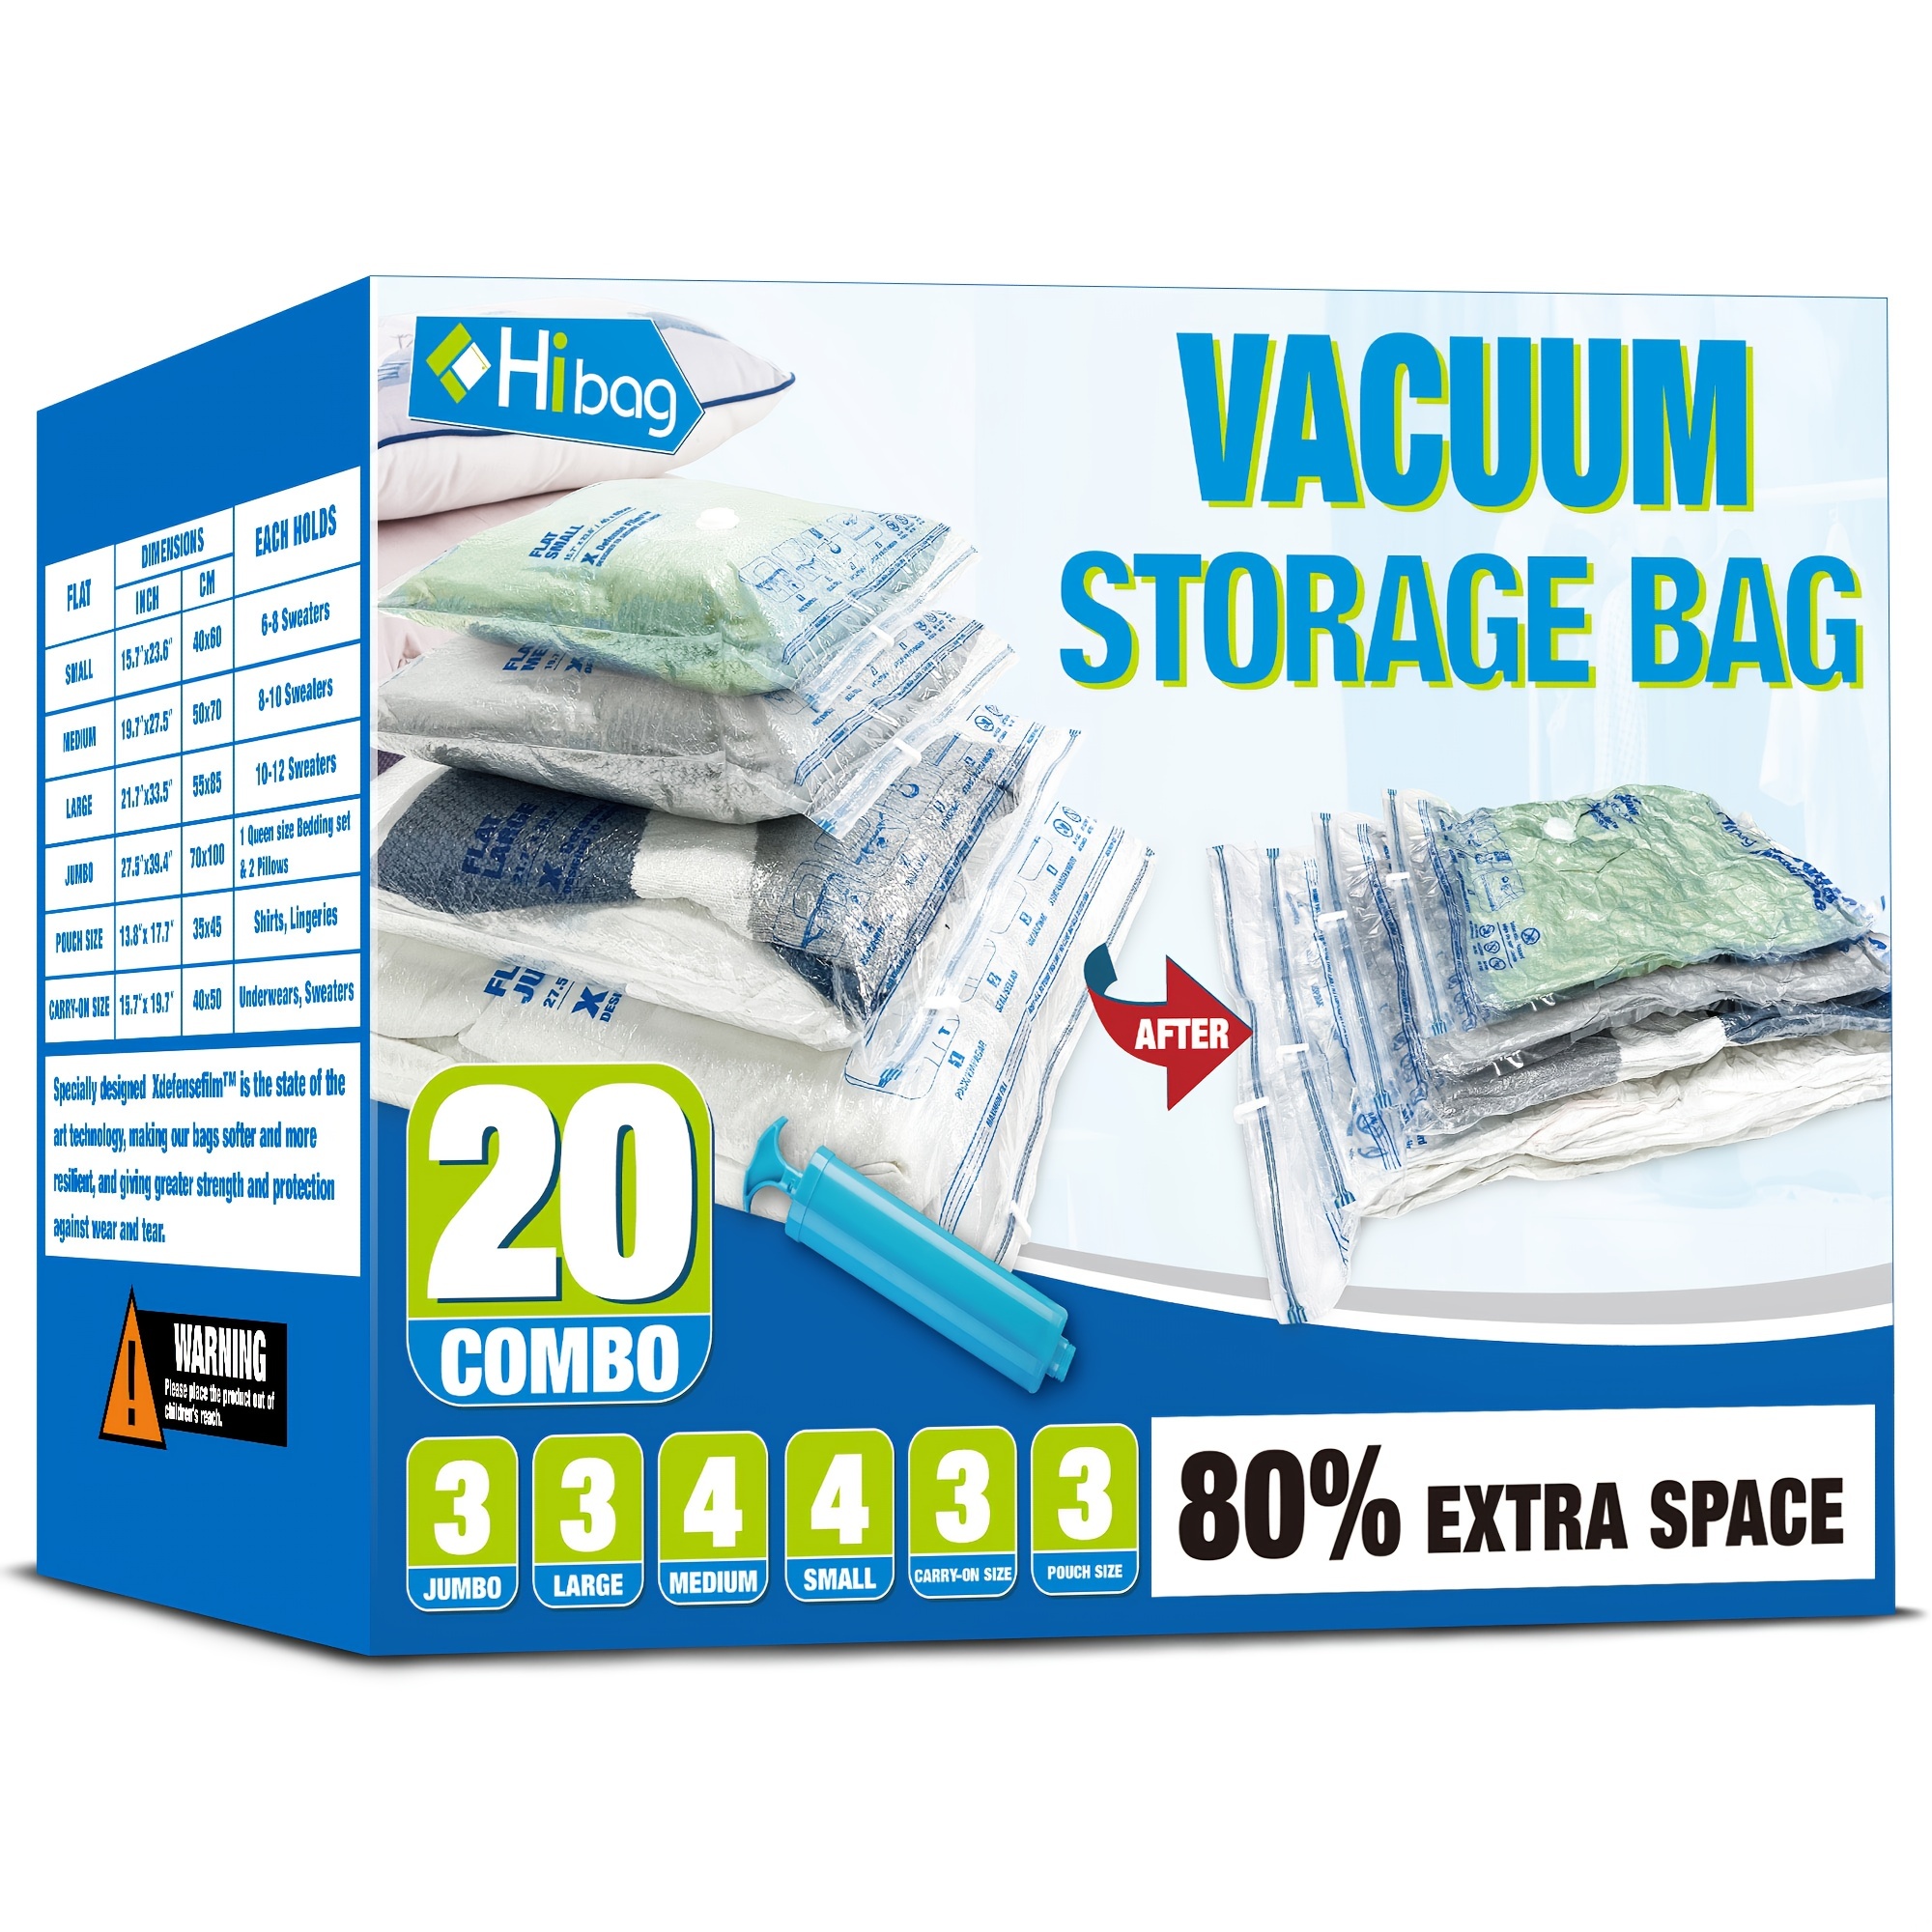 Hibag 15 Pack Vacuum Compression Storage Bags with Hand Pump (3 Small, 3  Medium, 3 Large, 3 Jumbo, 3 Roll Up Bags) 